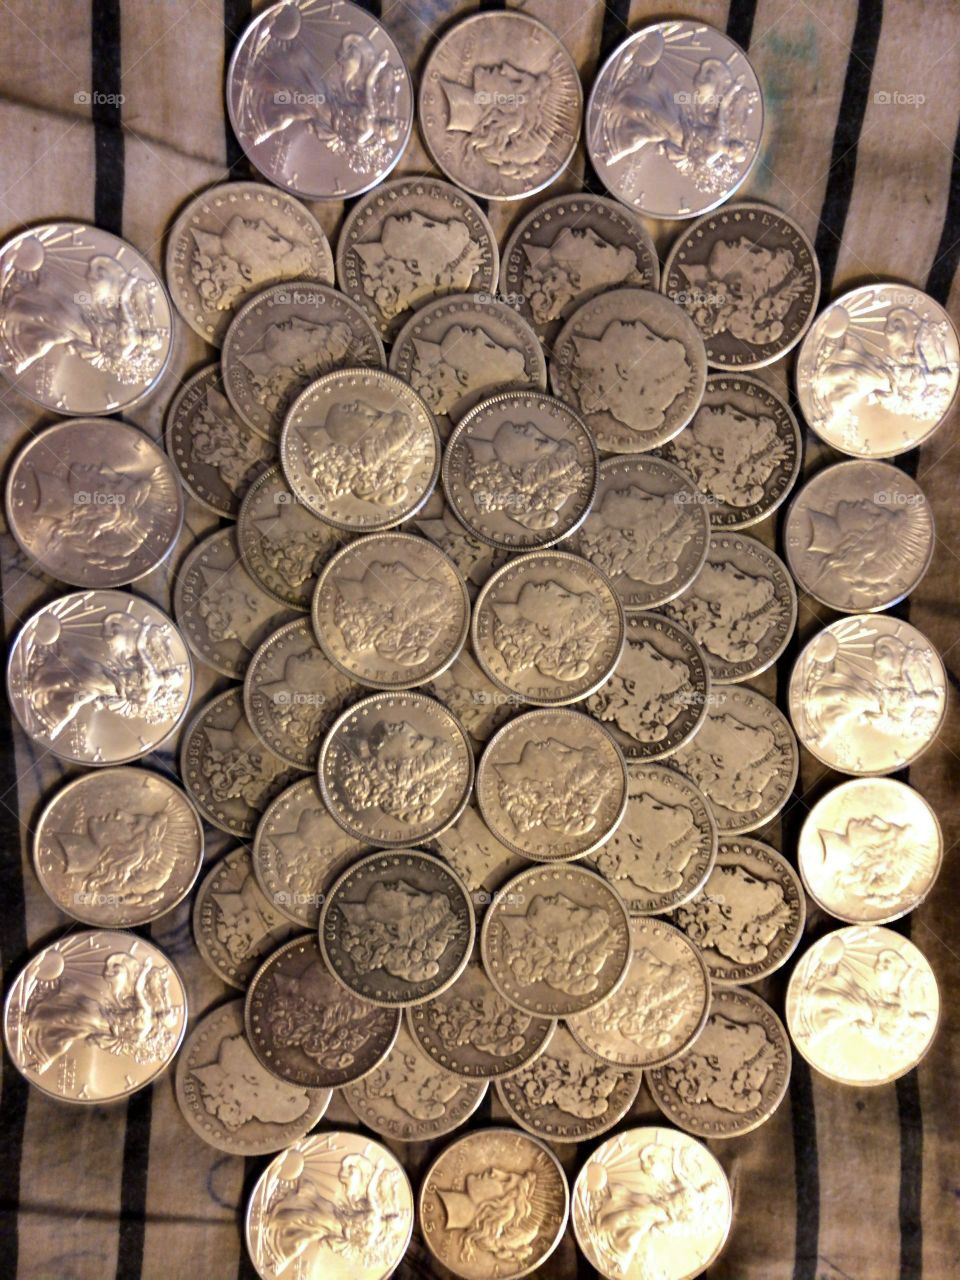 Morgan silver dollar collection I am proud of and historical pictures of American heritage should be bought and used maybe market wish. These pretty ladies need popularity they deserve it and owe it to them 💸